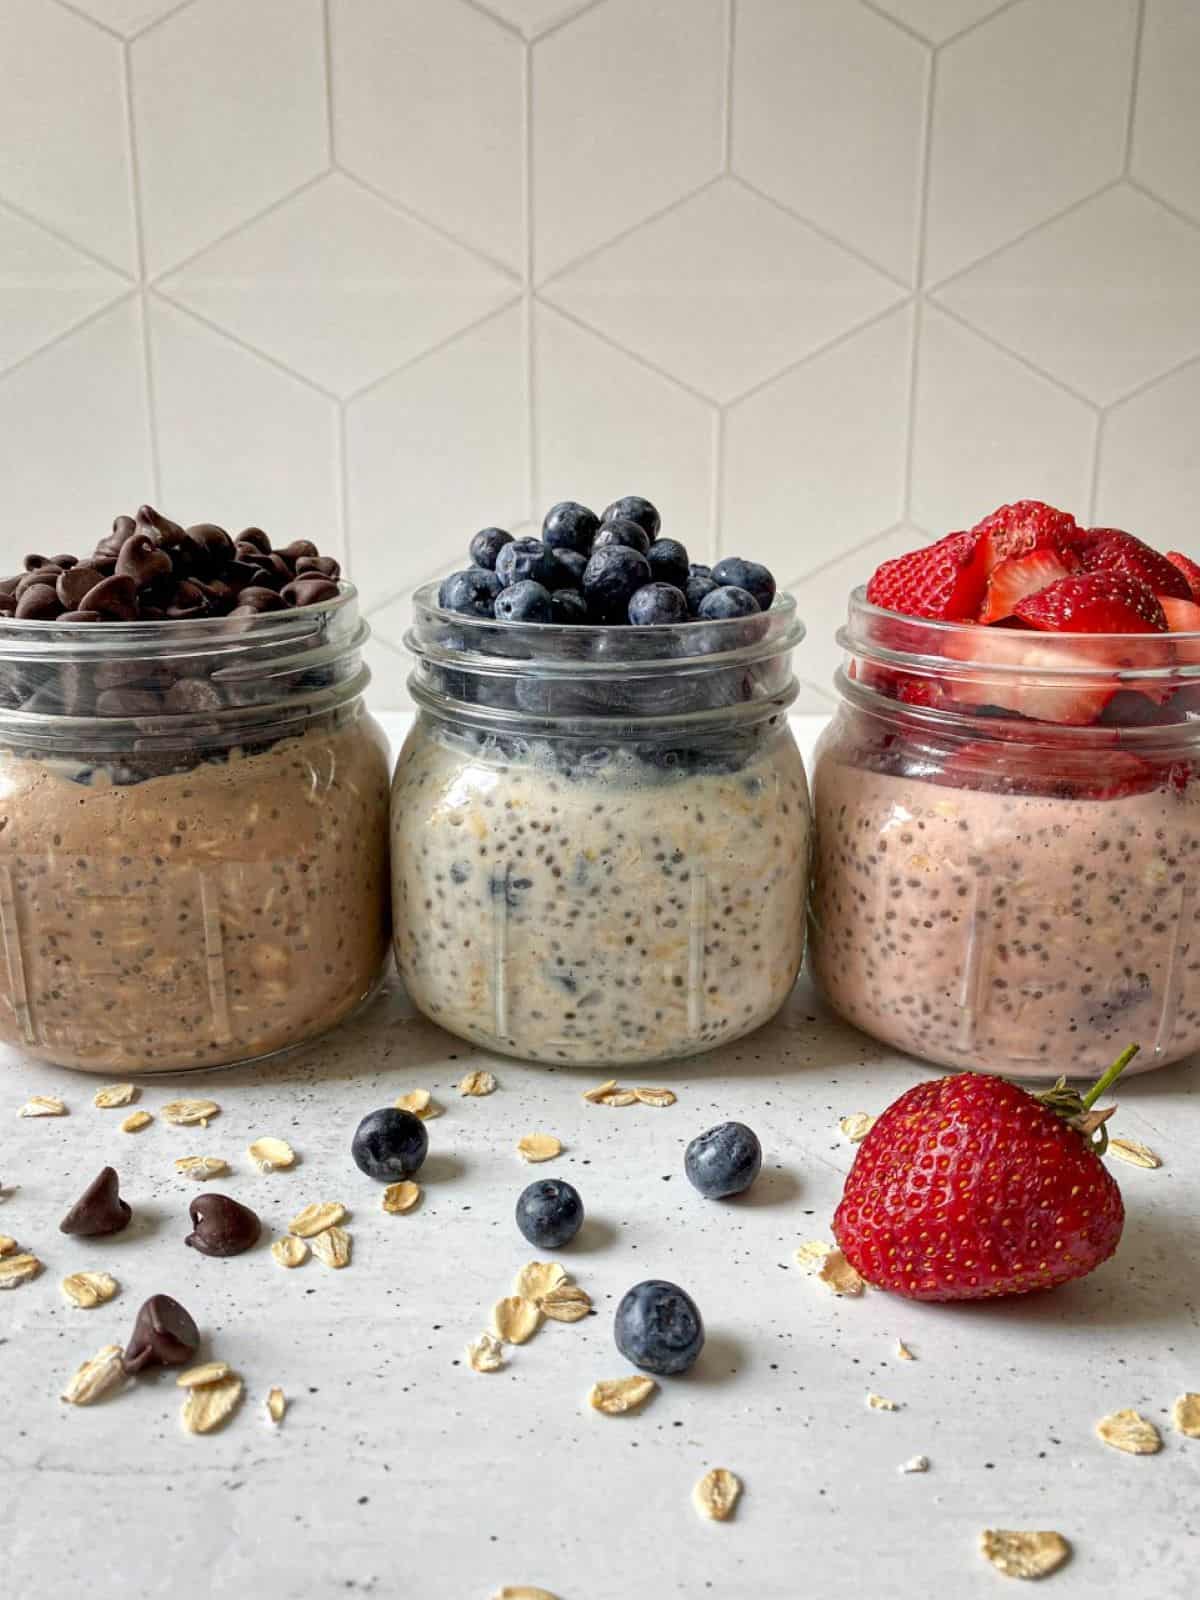 Three mason jars filled with high protein overnight oats. The three flavors include: Chocolate chip overnight oats have chocolate chips on top, blueberry cheesecake overnight oats has blueberries on tope, and strawberry shortcake overnight oats has chopped strawberries on top.